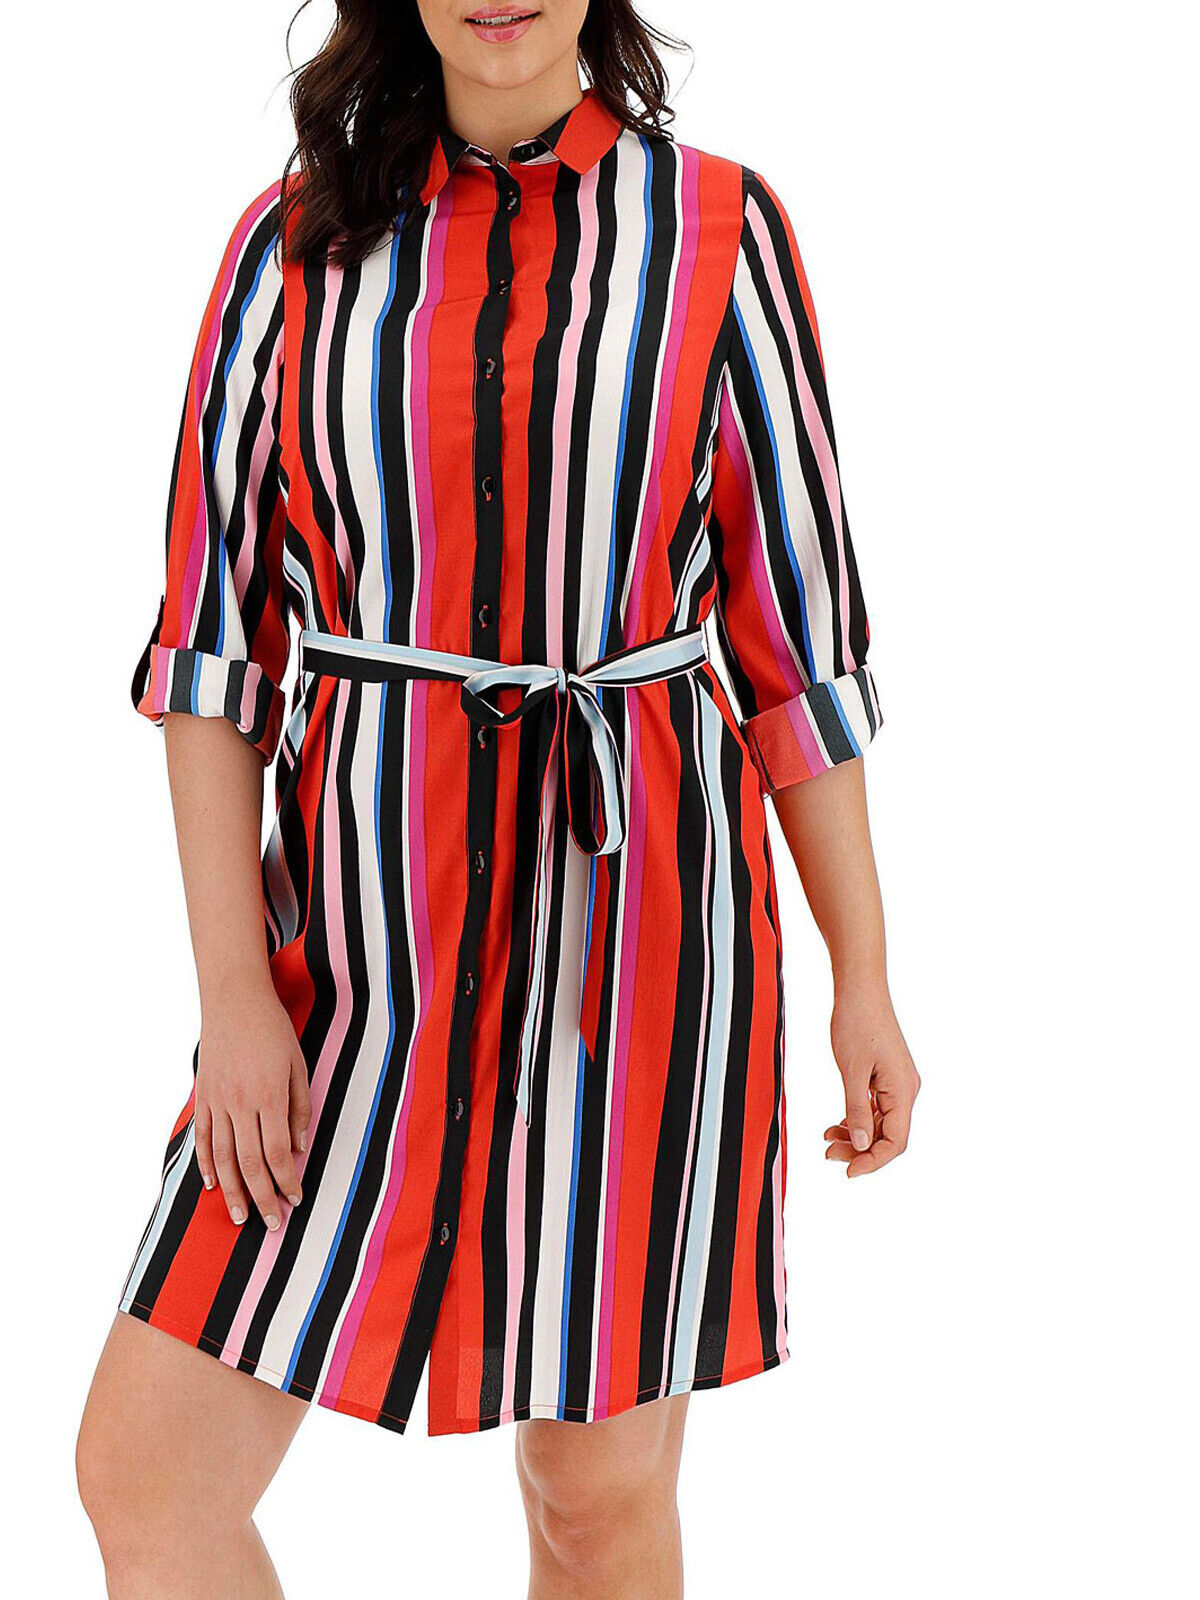 New Simply Be Red Striped Mini Shirt Dress with Tie Belt  in Sizes 12 or 18